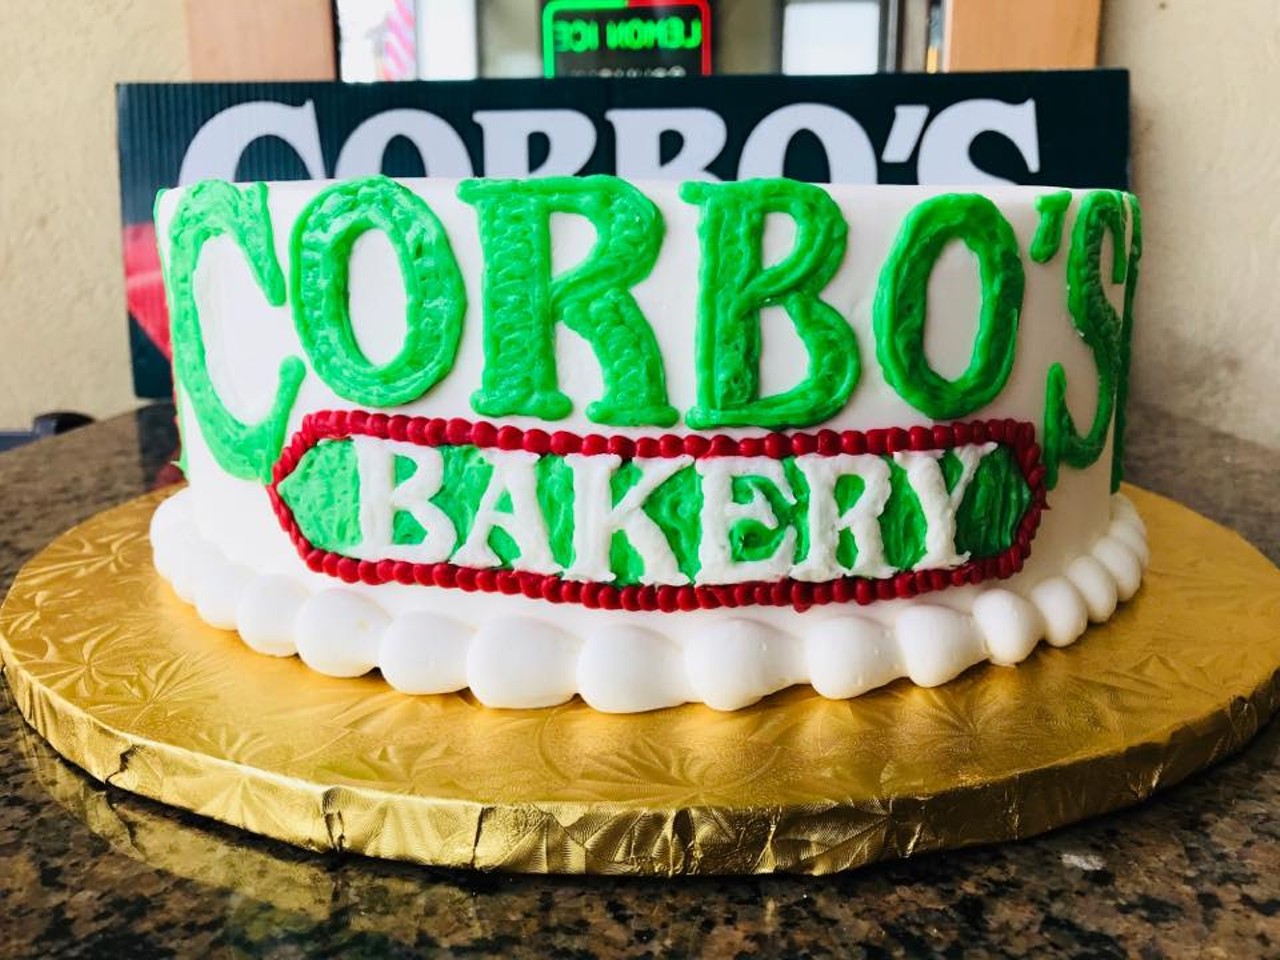  Corbo&#146;s Bakery
Multiple Locations 
Originally opening in Little Italy in 1948, Corbo&#146;s has expanded in recent years and opened locations by Playhouse Square, in addition to Strongsville, Mayfield Heights and Brecksville. Along with their signature Italian cookies and cannolis, their cassata cake is second to none. 
Photo via Corbo&#146;s Bakery/Facebook